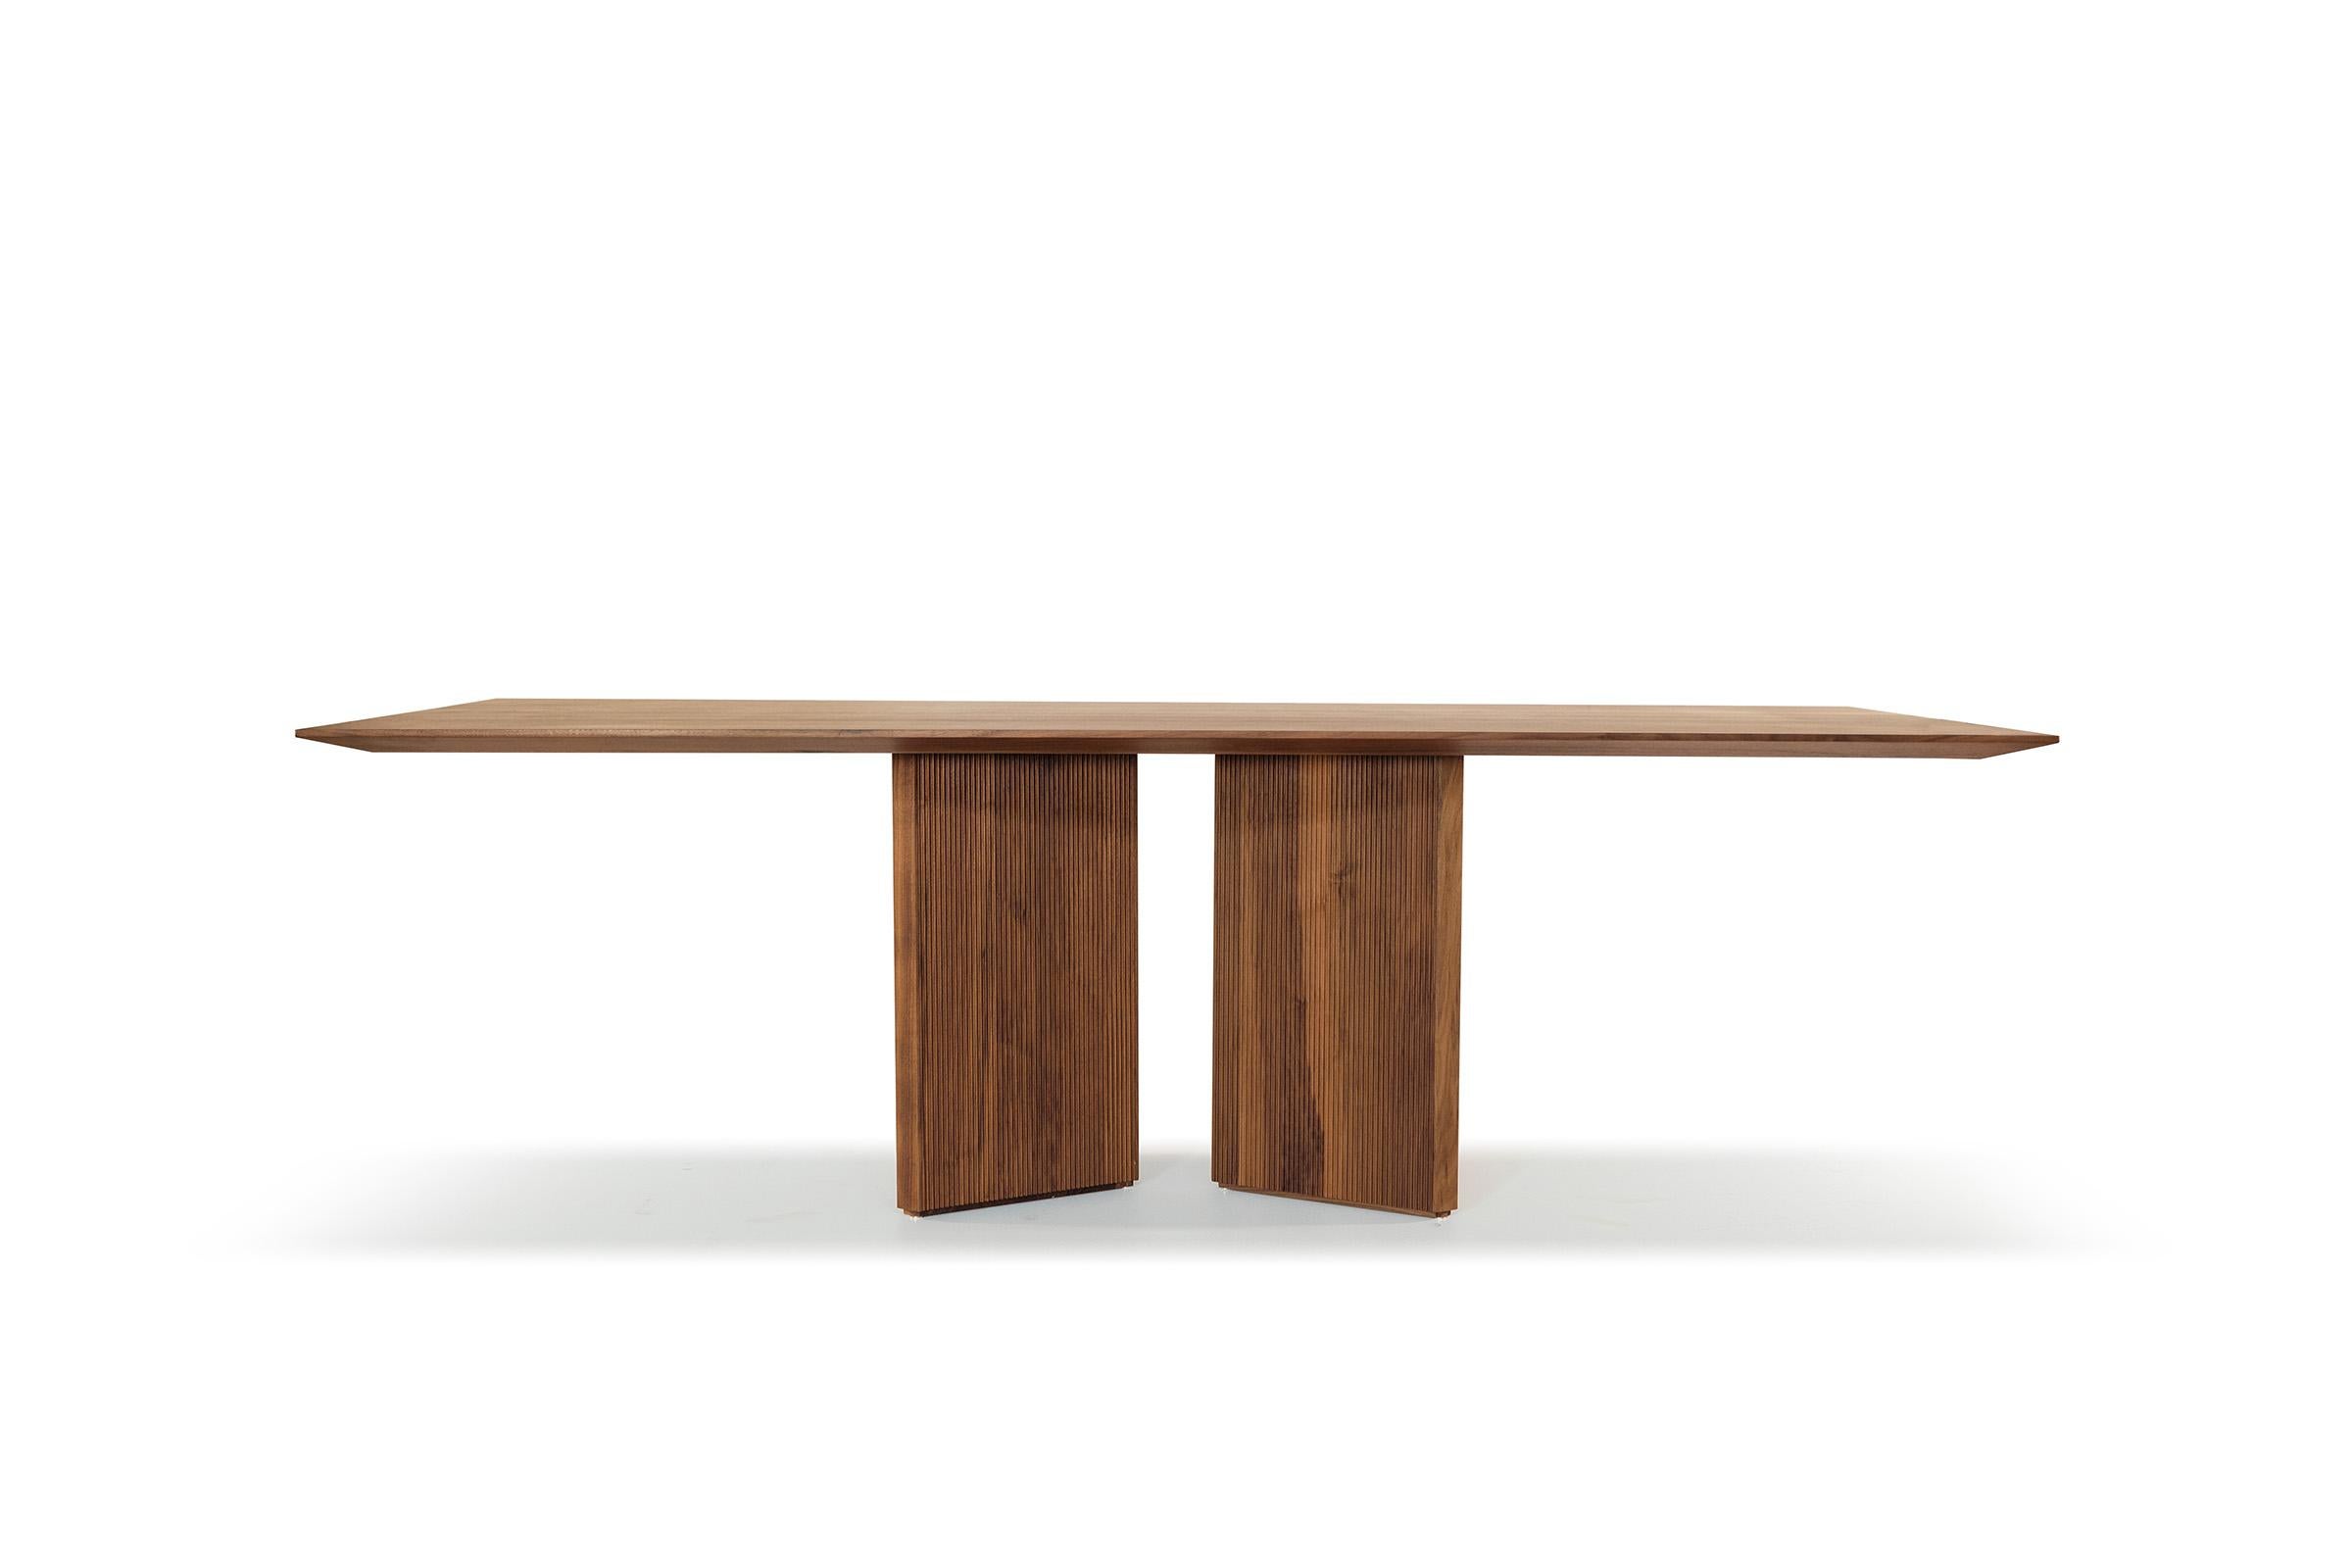 Table with top made of solid wood glued lists with thin edges. The base consists of prism-shaped legs, each characterized by three solid wood vertices, and surfaces that can be smooth or with Fresart processing, which creates a modern and dynamic